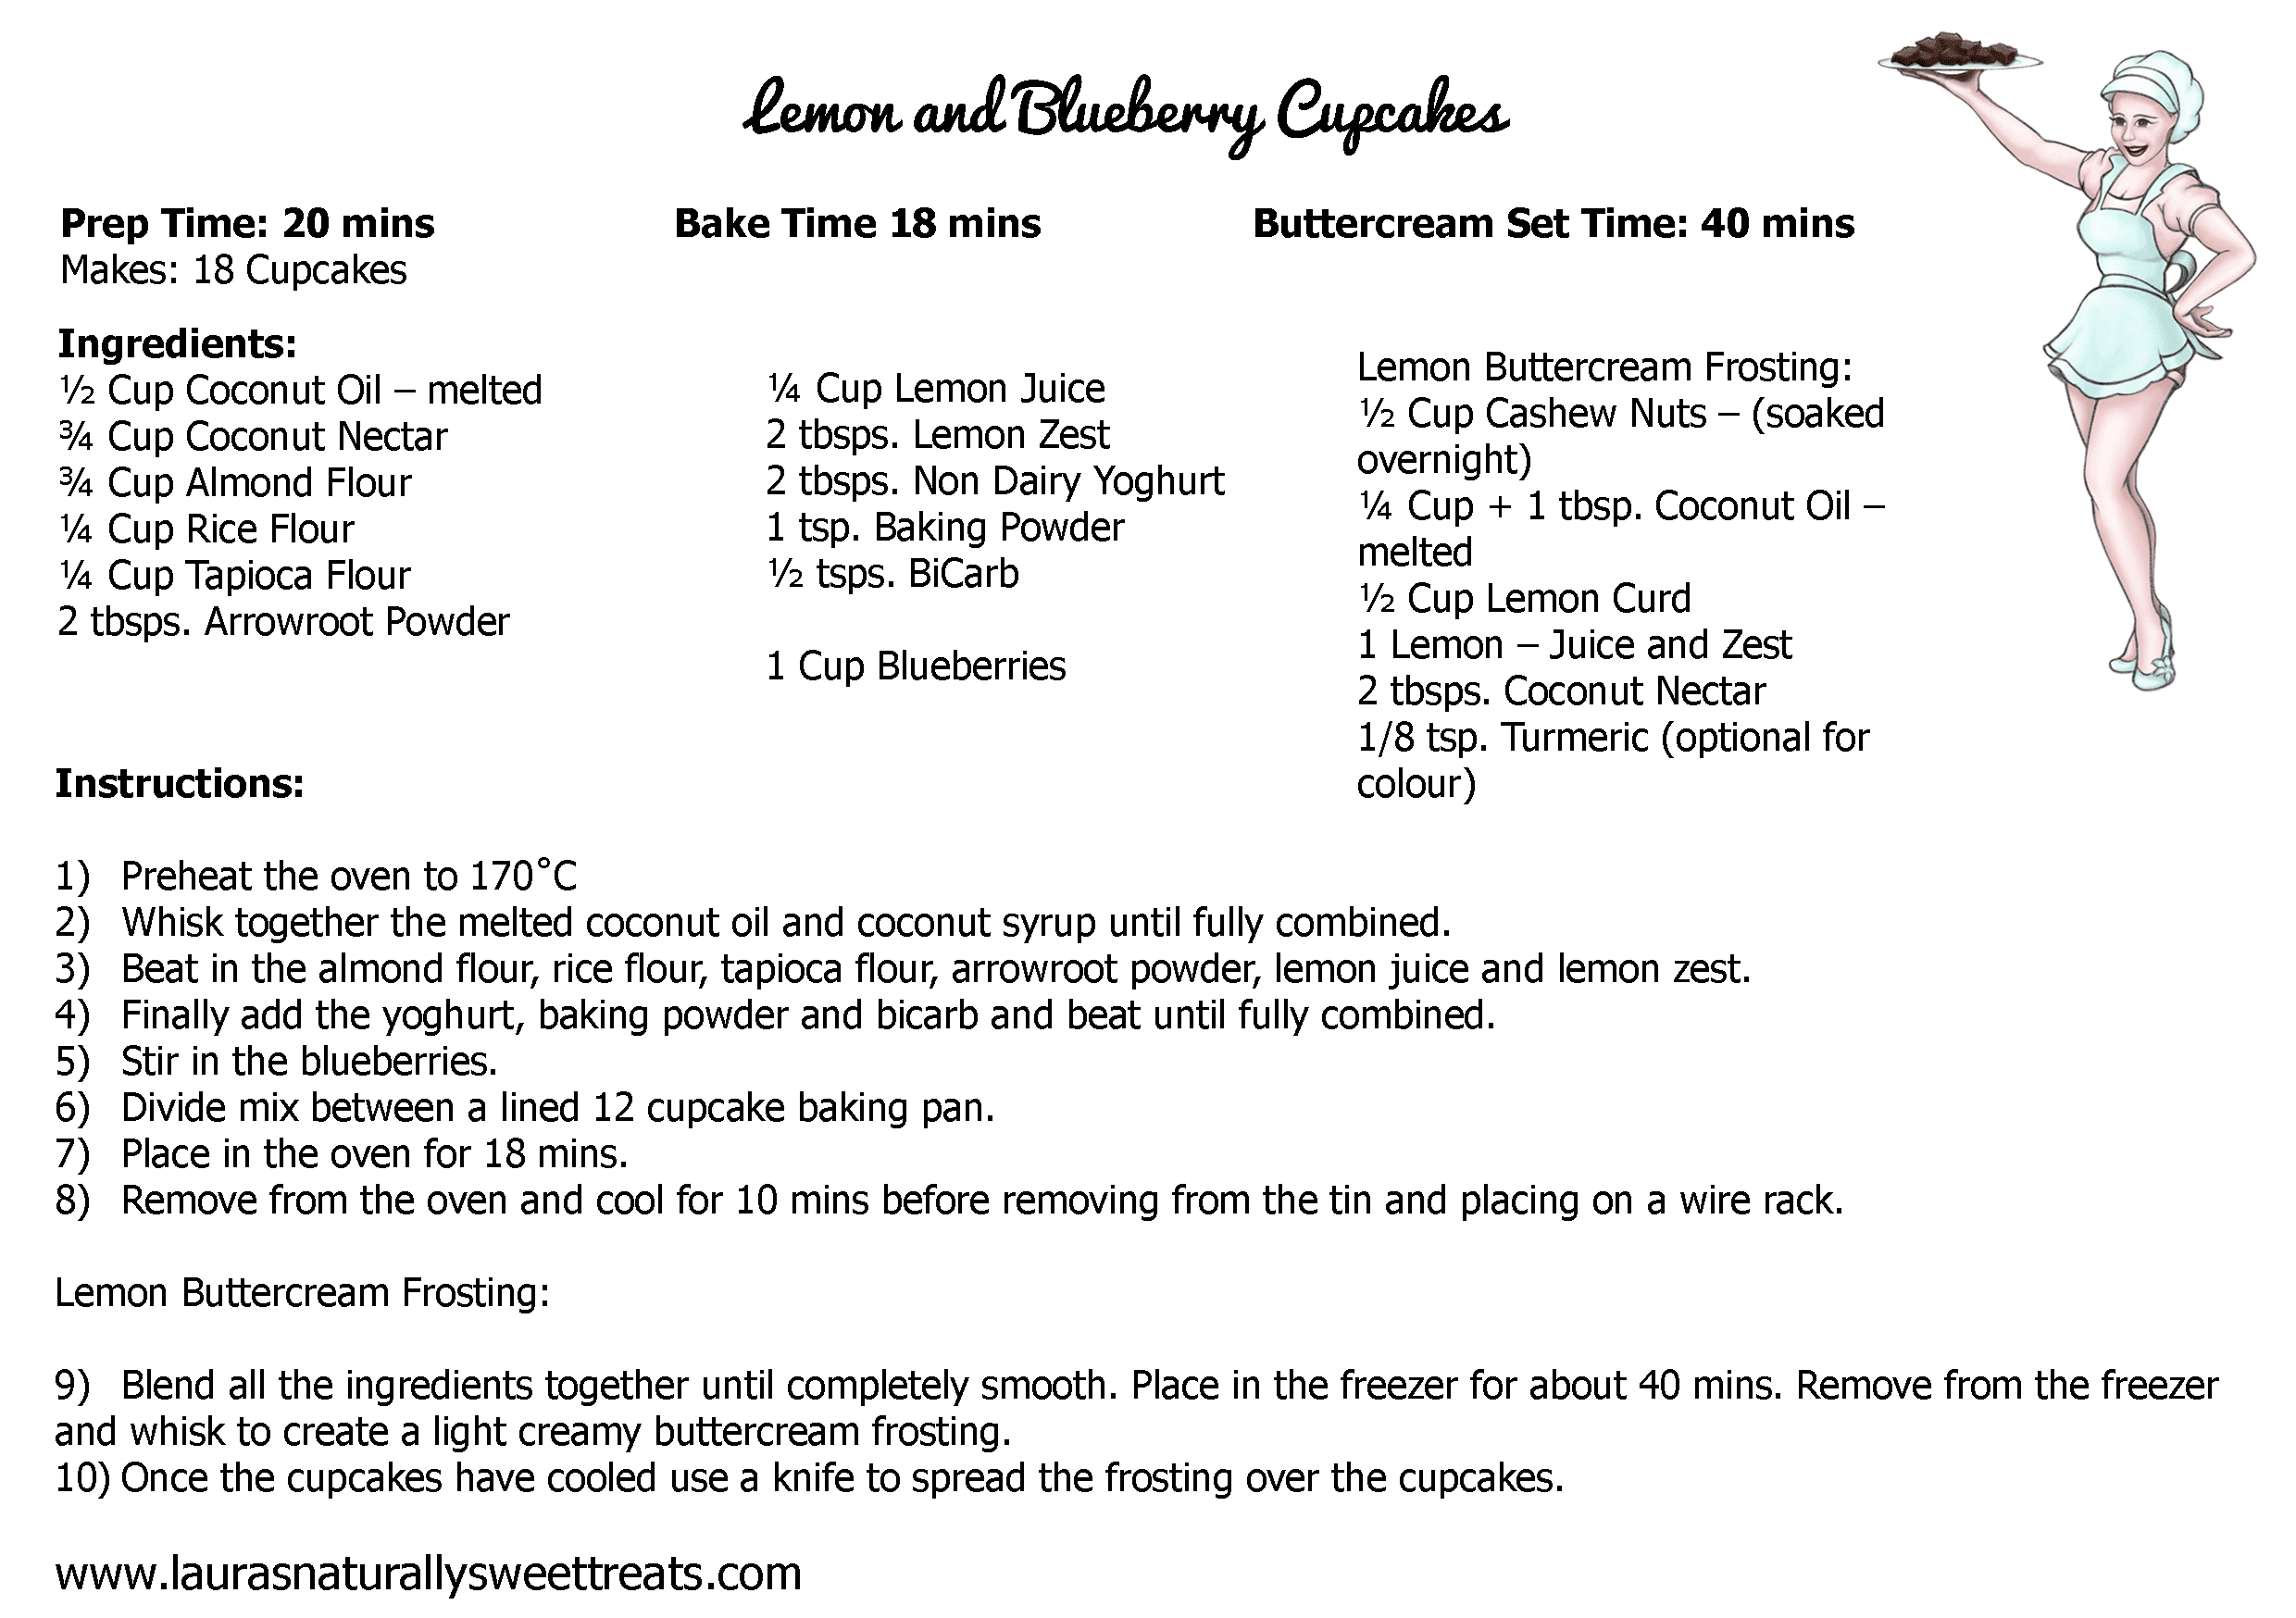 lemon and blueberry cupcakes recipe card